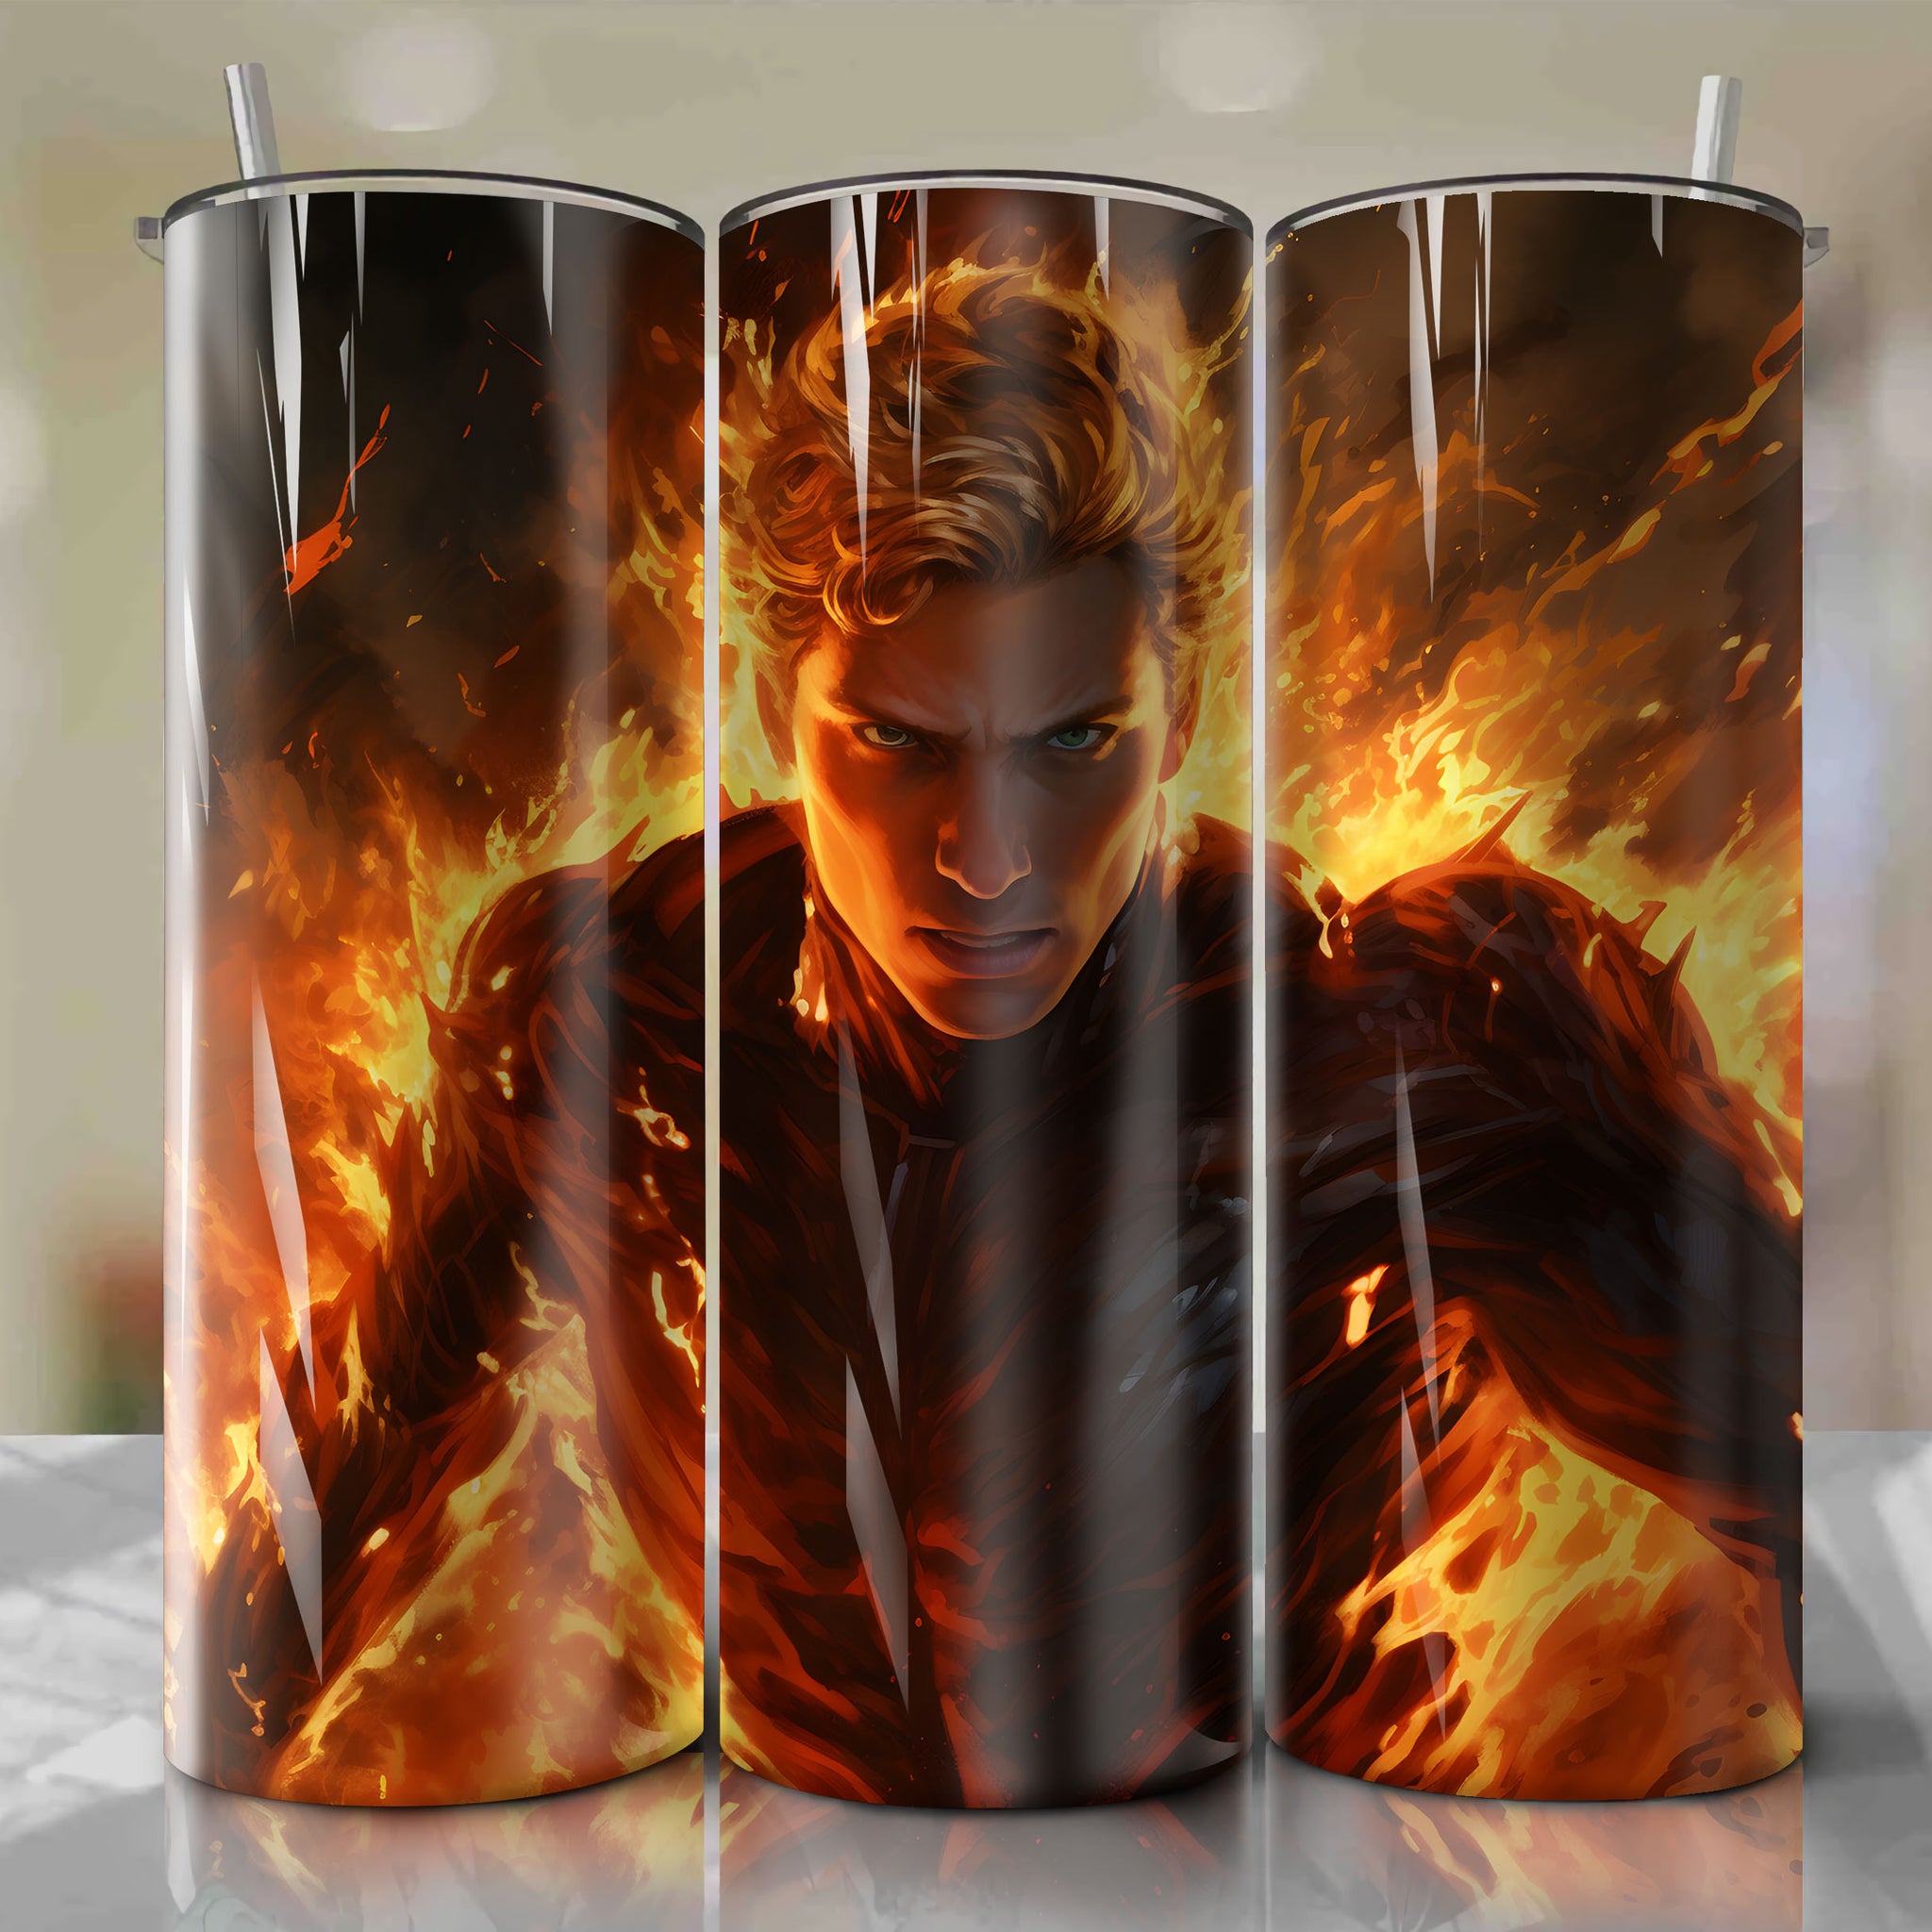 20 Oz Tumbler Wrap - Dynamic Animated Art by Skan Srisuwan: Human Torch from Fantastic Four in Fiery Action
